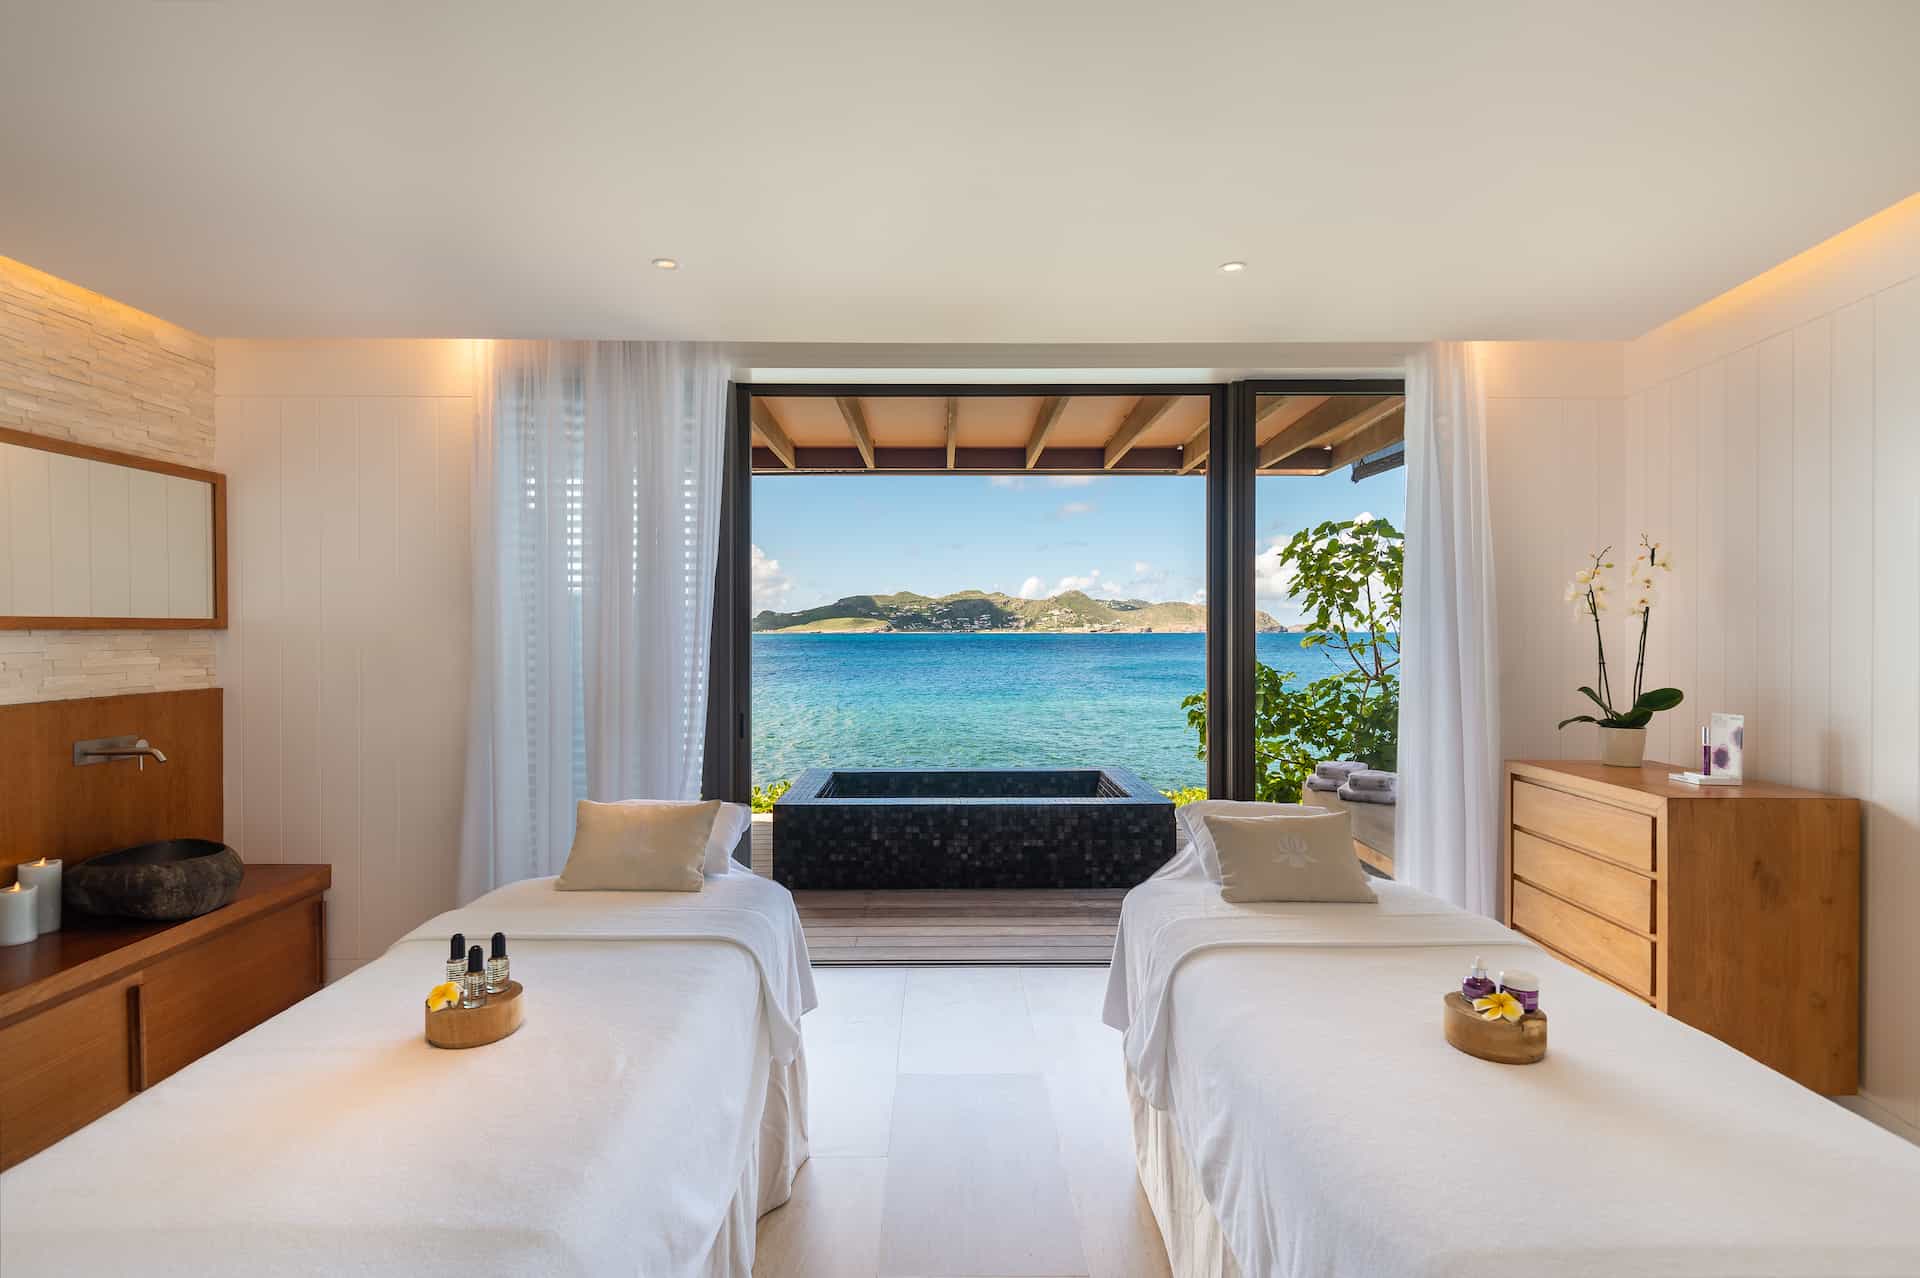 Hotel Christopher St Barth offers an intimate Caribbean retreat with stunning ocean views